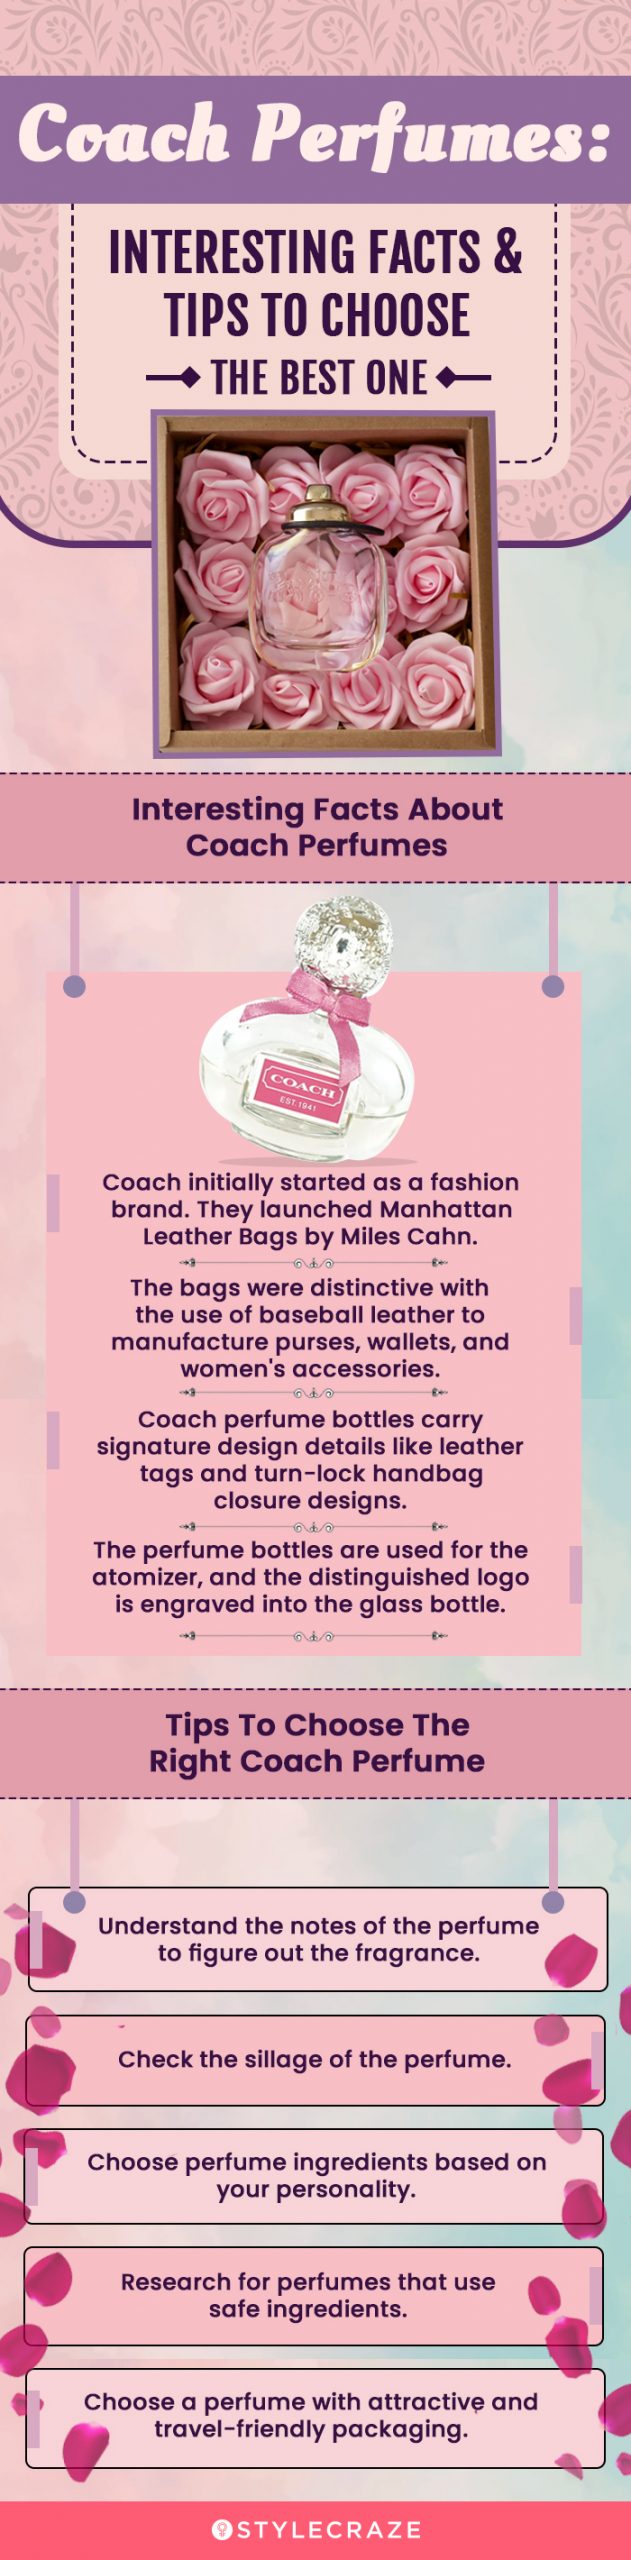 Coach Perfumes: Interesting Facts & Tips To Choose The Best One